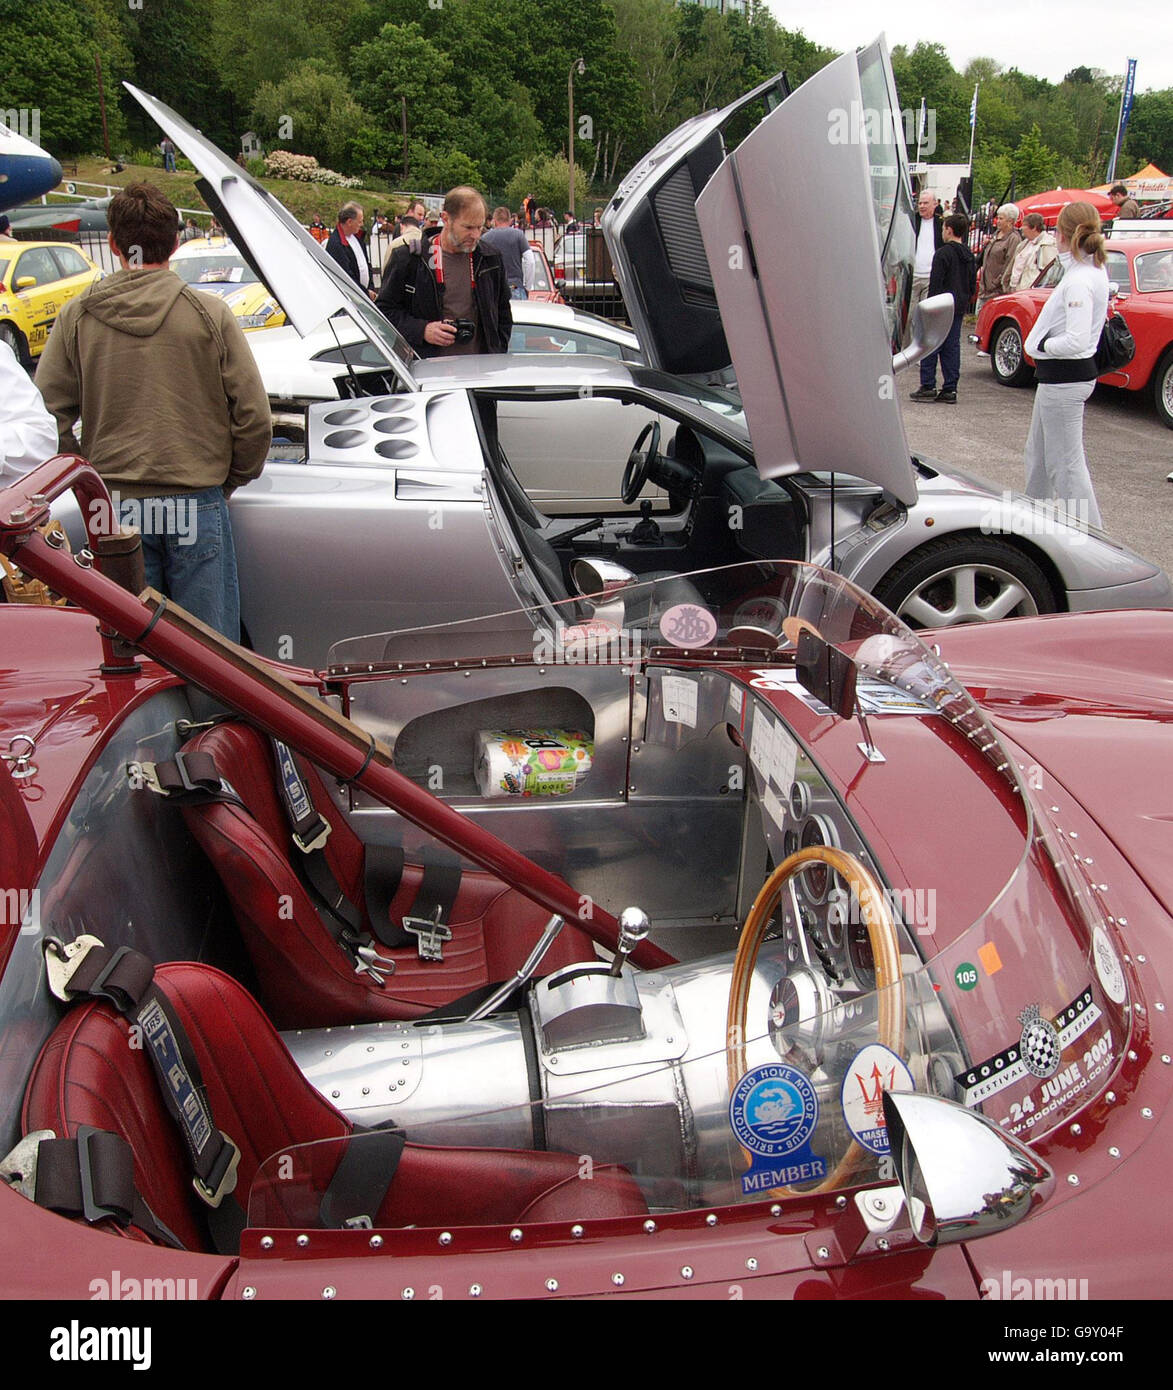 Visitors look at a Bugatti EB 110 with the cockpit of a Maserati 4000 in the foreground, which has been converted for racing, during the Brooklands Car Museum Italian Car Day. Stock Photo